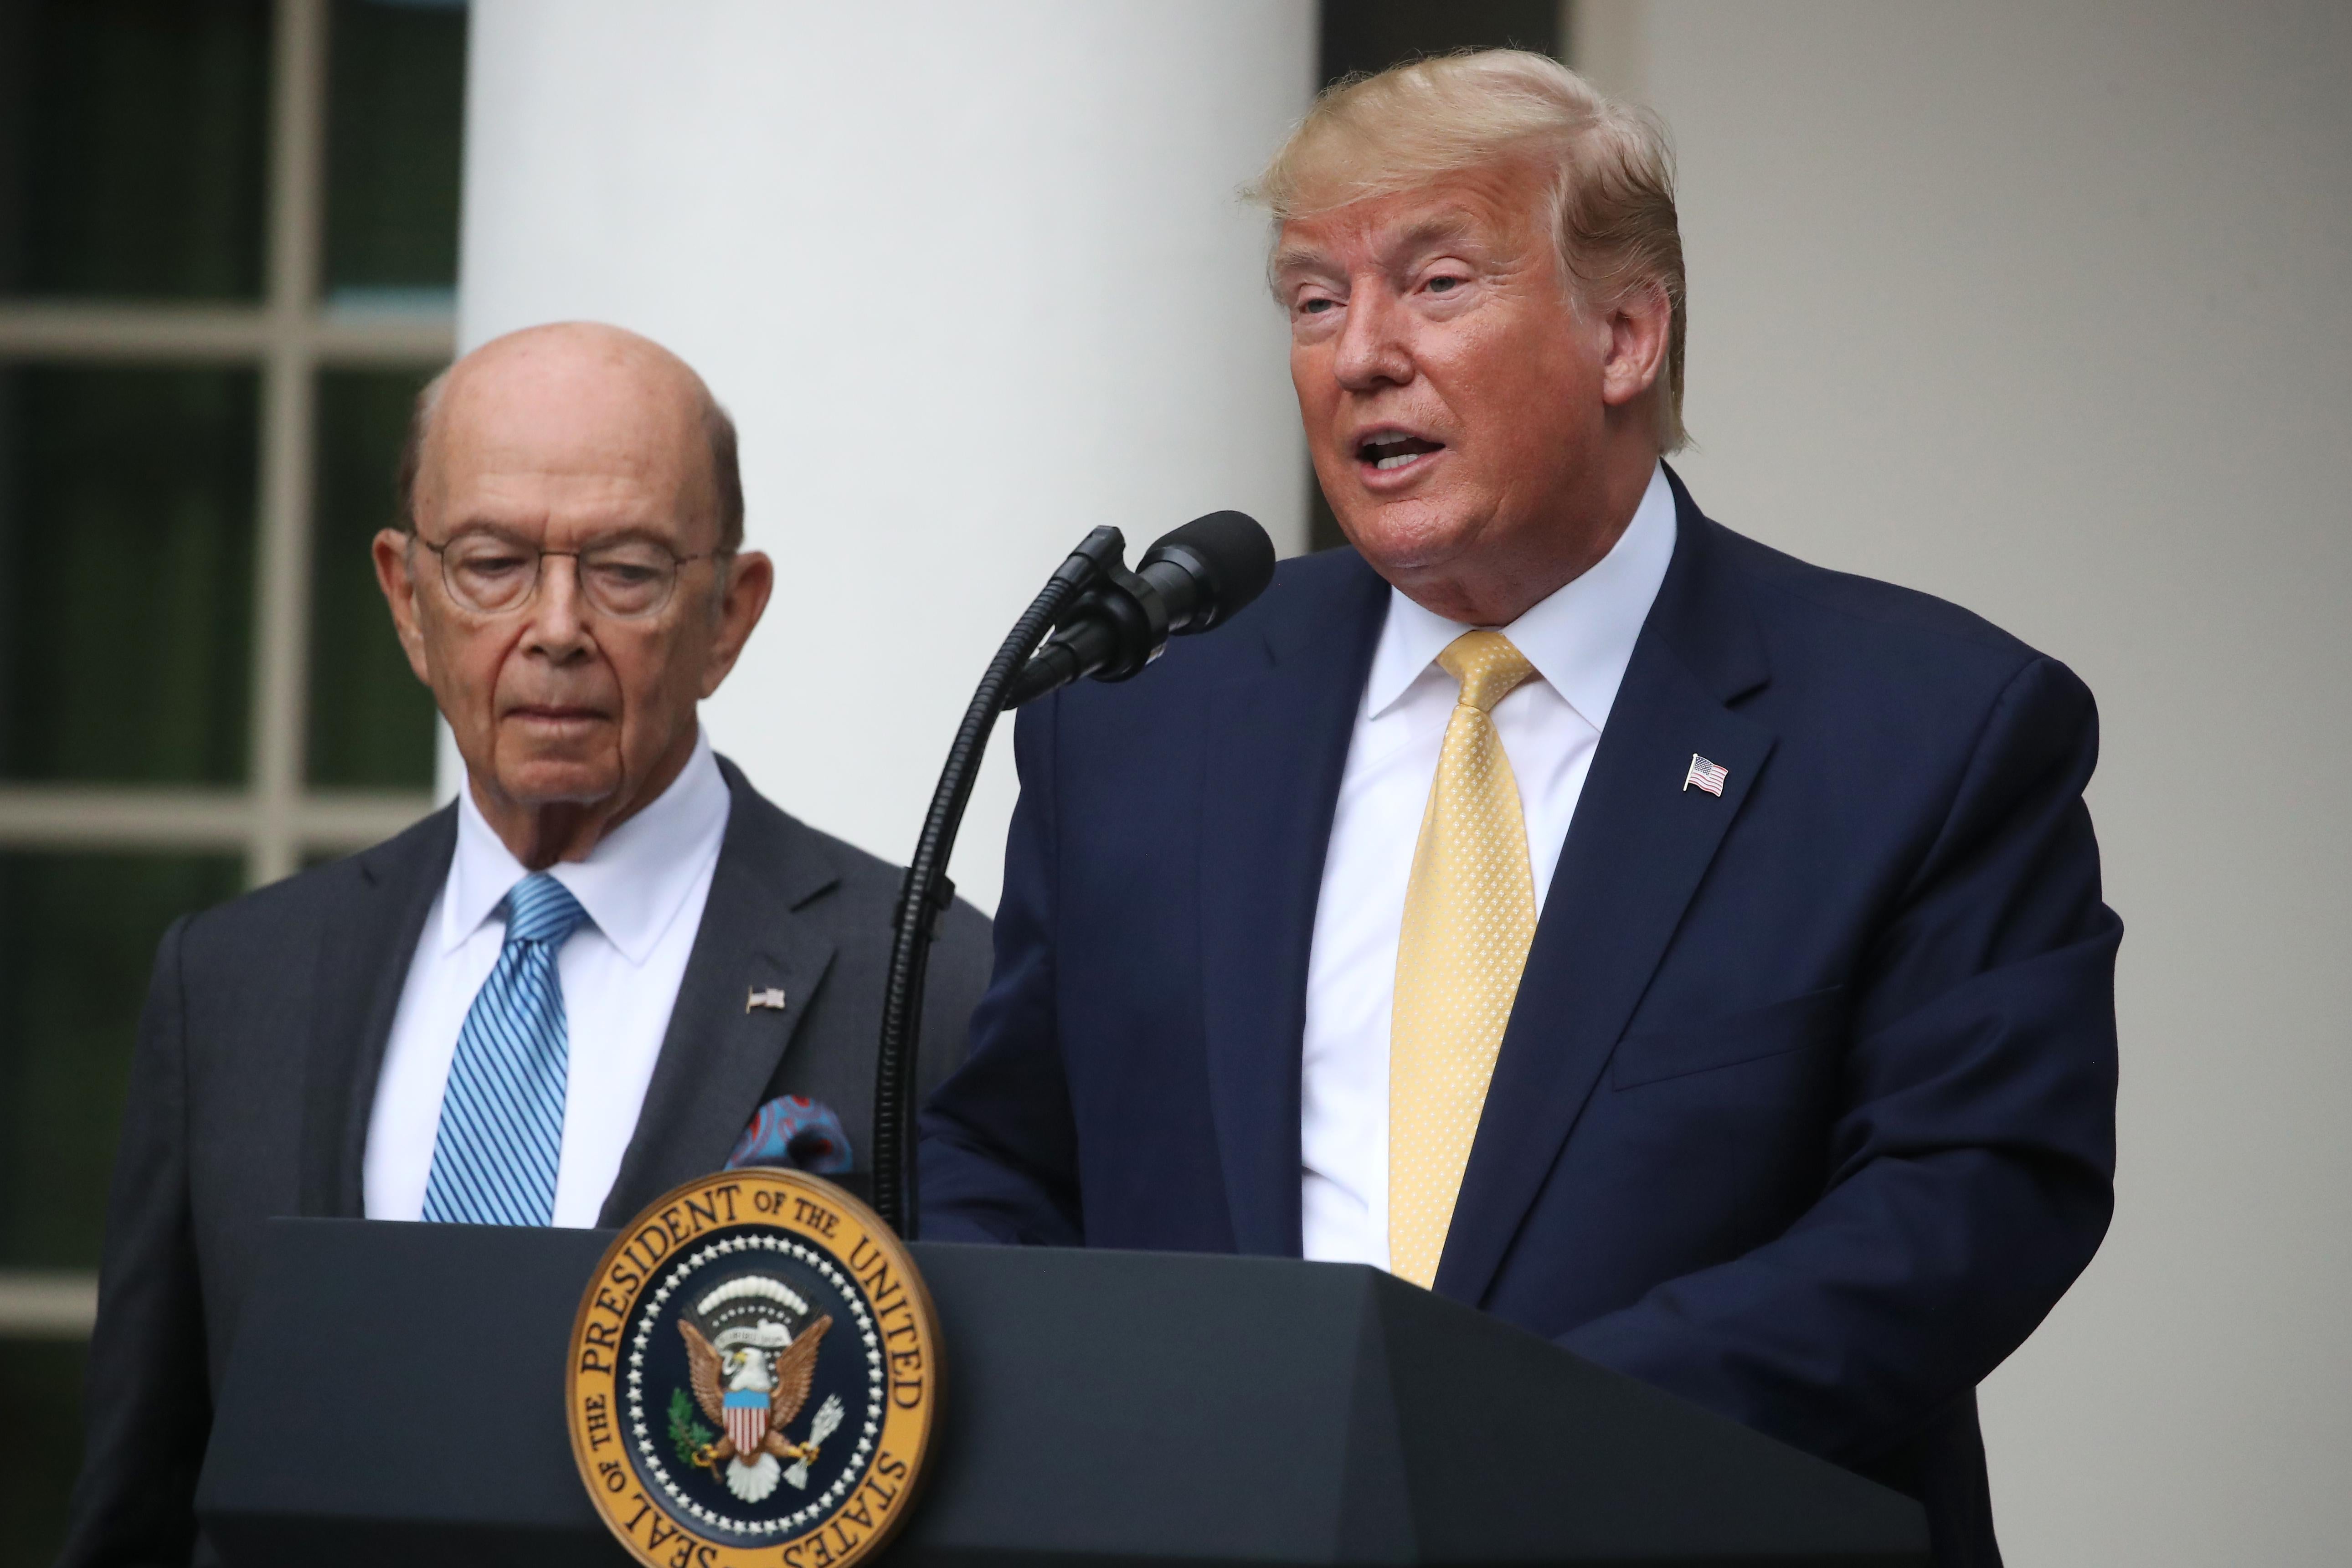 Trump speaks at a lectern while Wilbur Ross stands next to him.